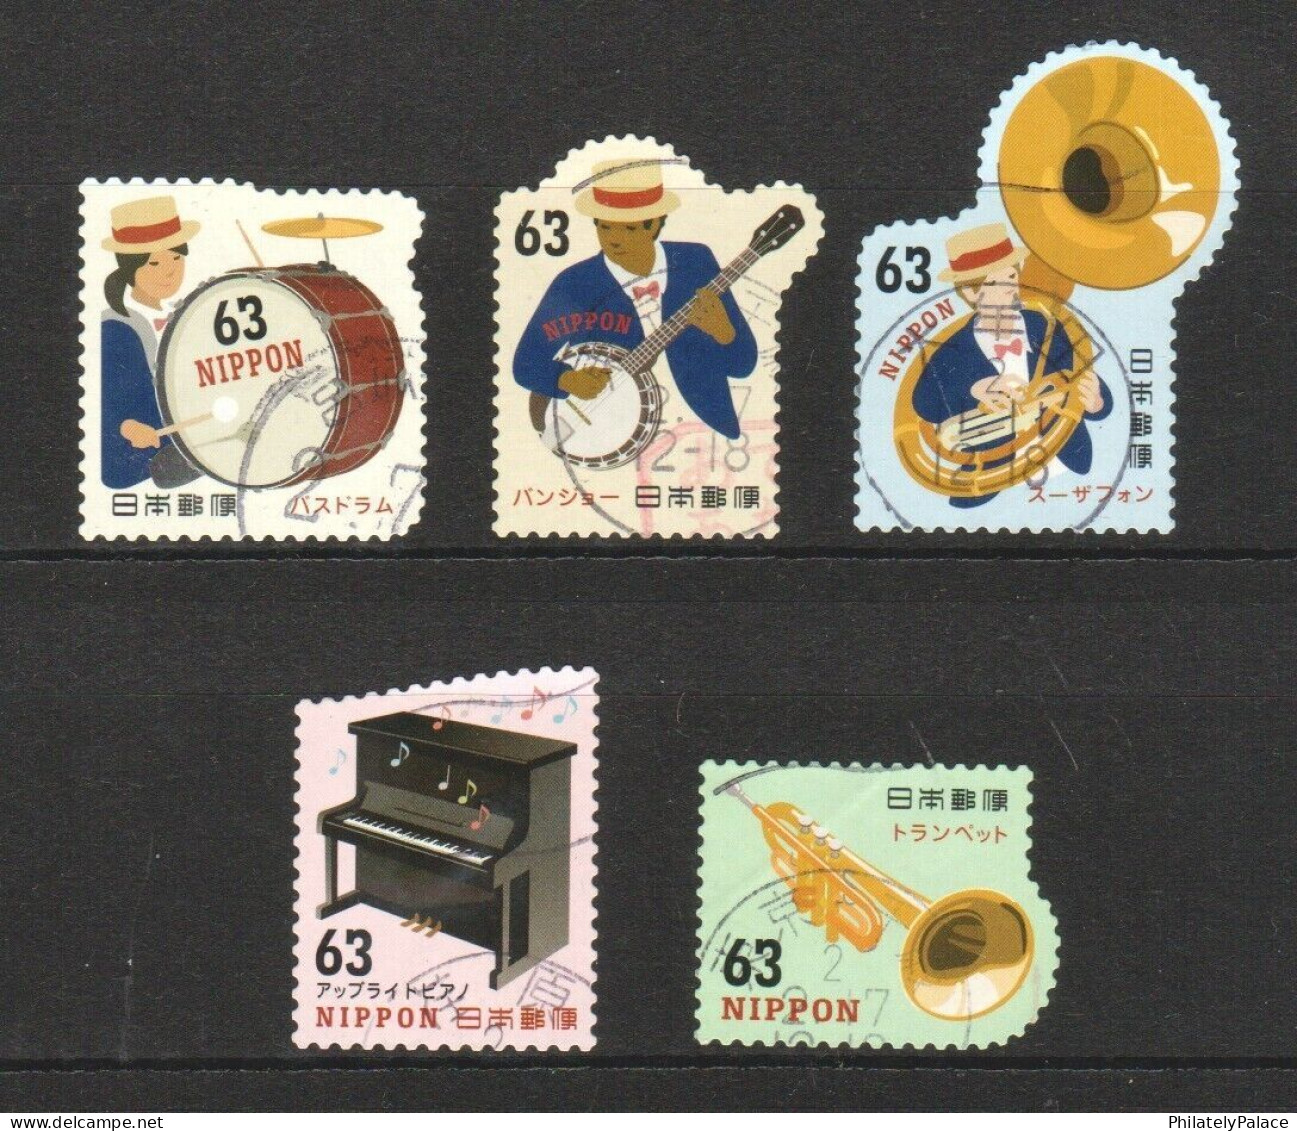 JAPAN 2019 MUSICAL INSTRUMENTS SERIES 2 (DIXIELAND JAZZ MUSIC) 63 YEN 5 STAMPS USED (*) - Used Stamps